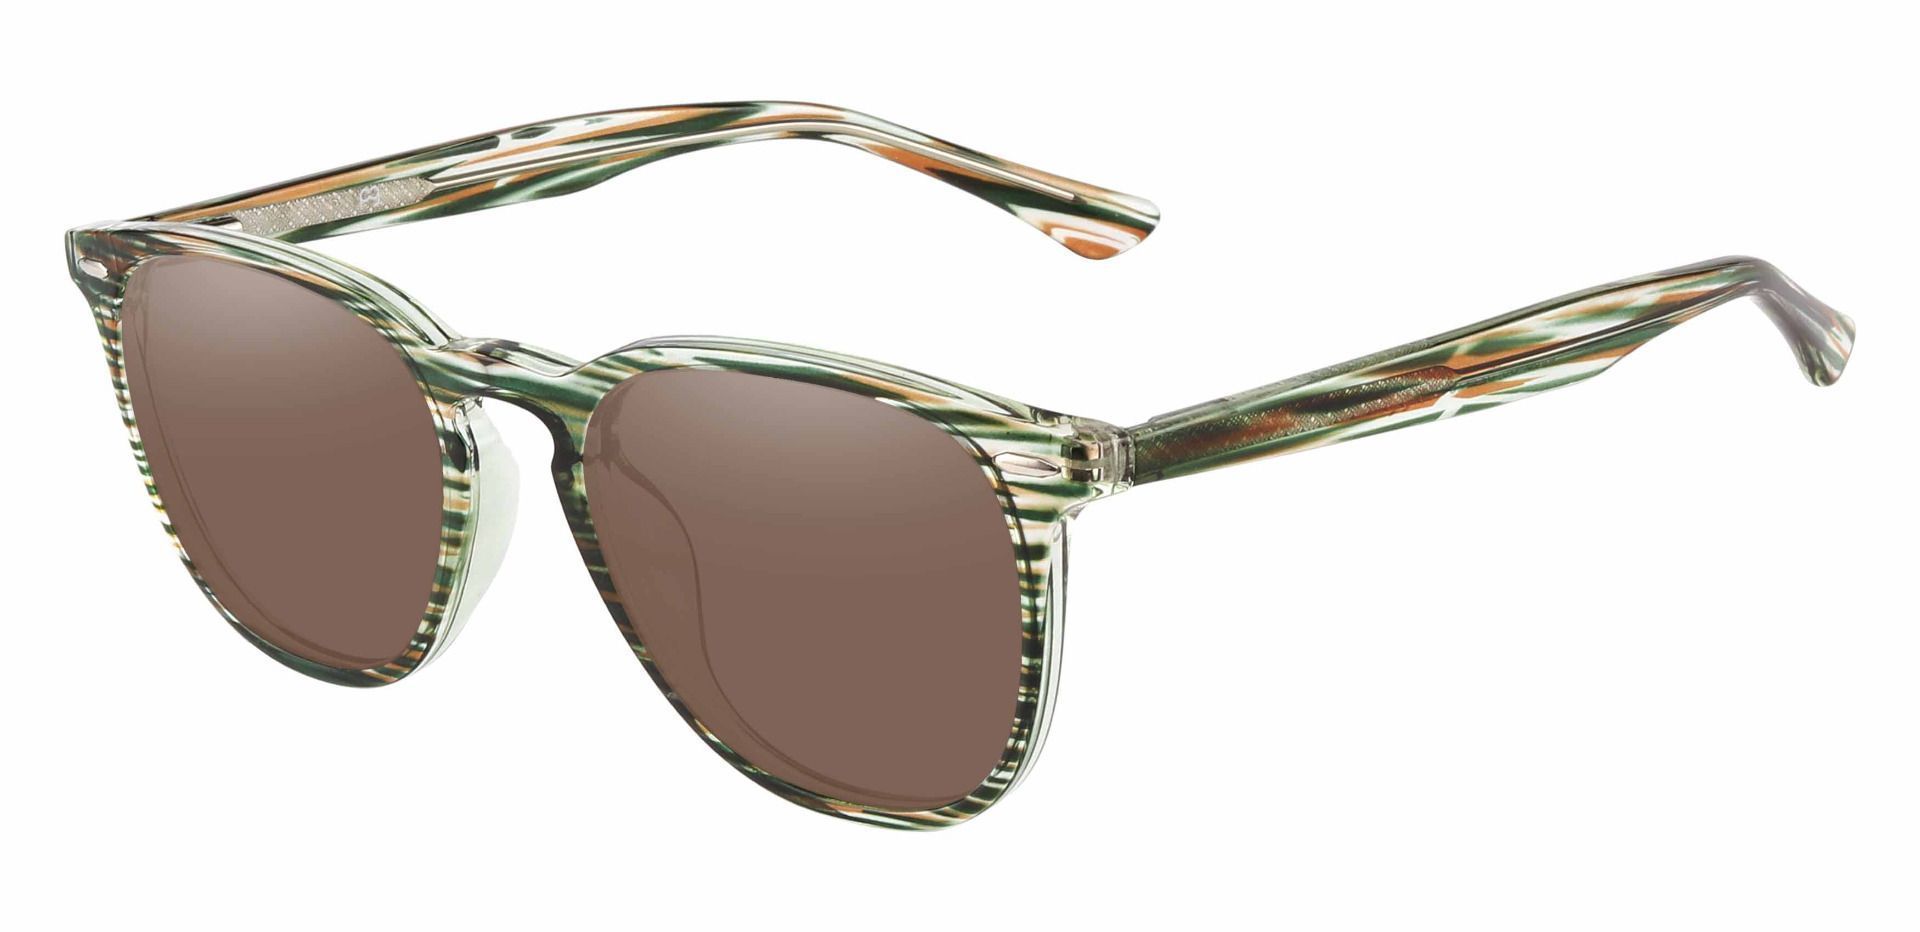 Sycamore Oval Prescription Sunglasses - Green Frame With Brown Lenses